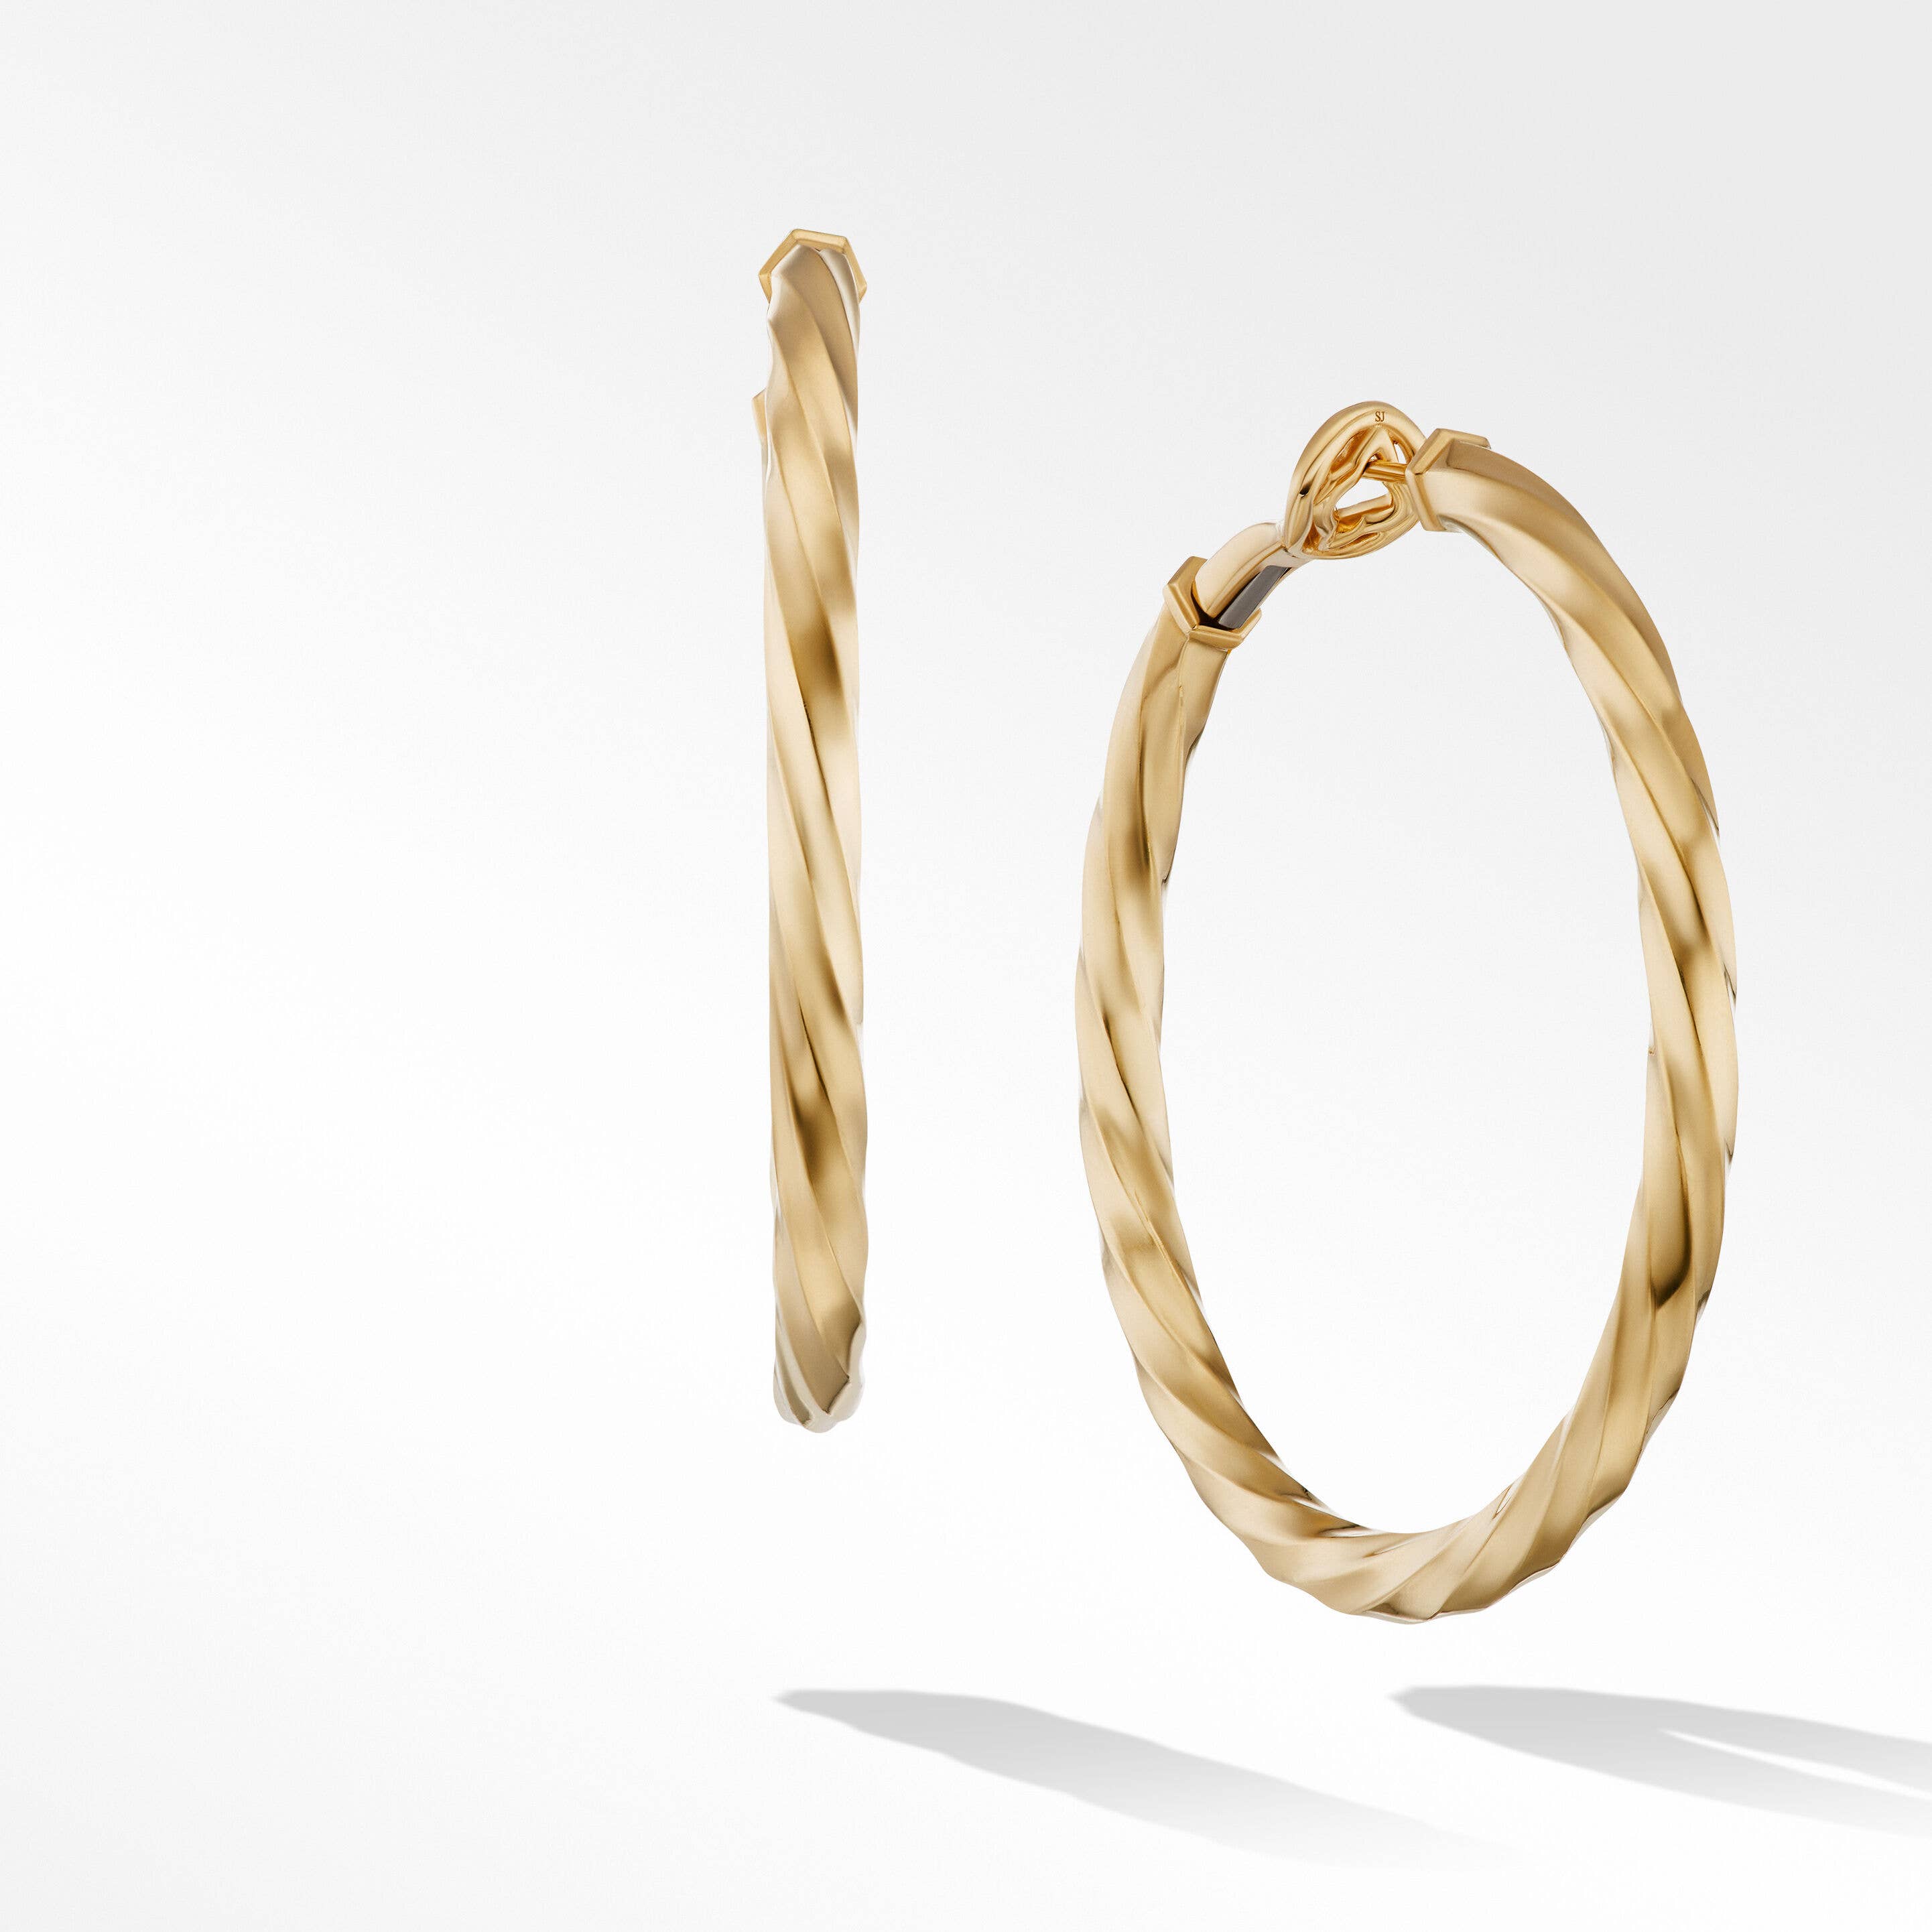 Cable Edge® Hoop Earrings in Recycled 18K Yellow Gold